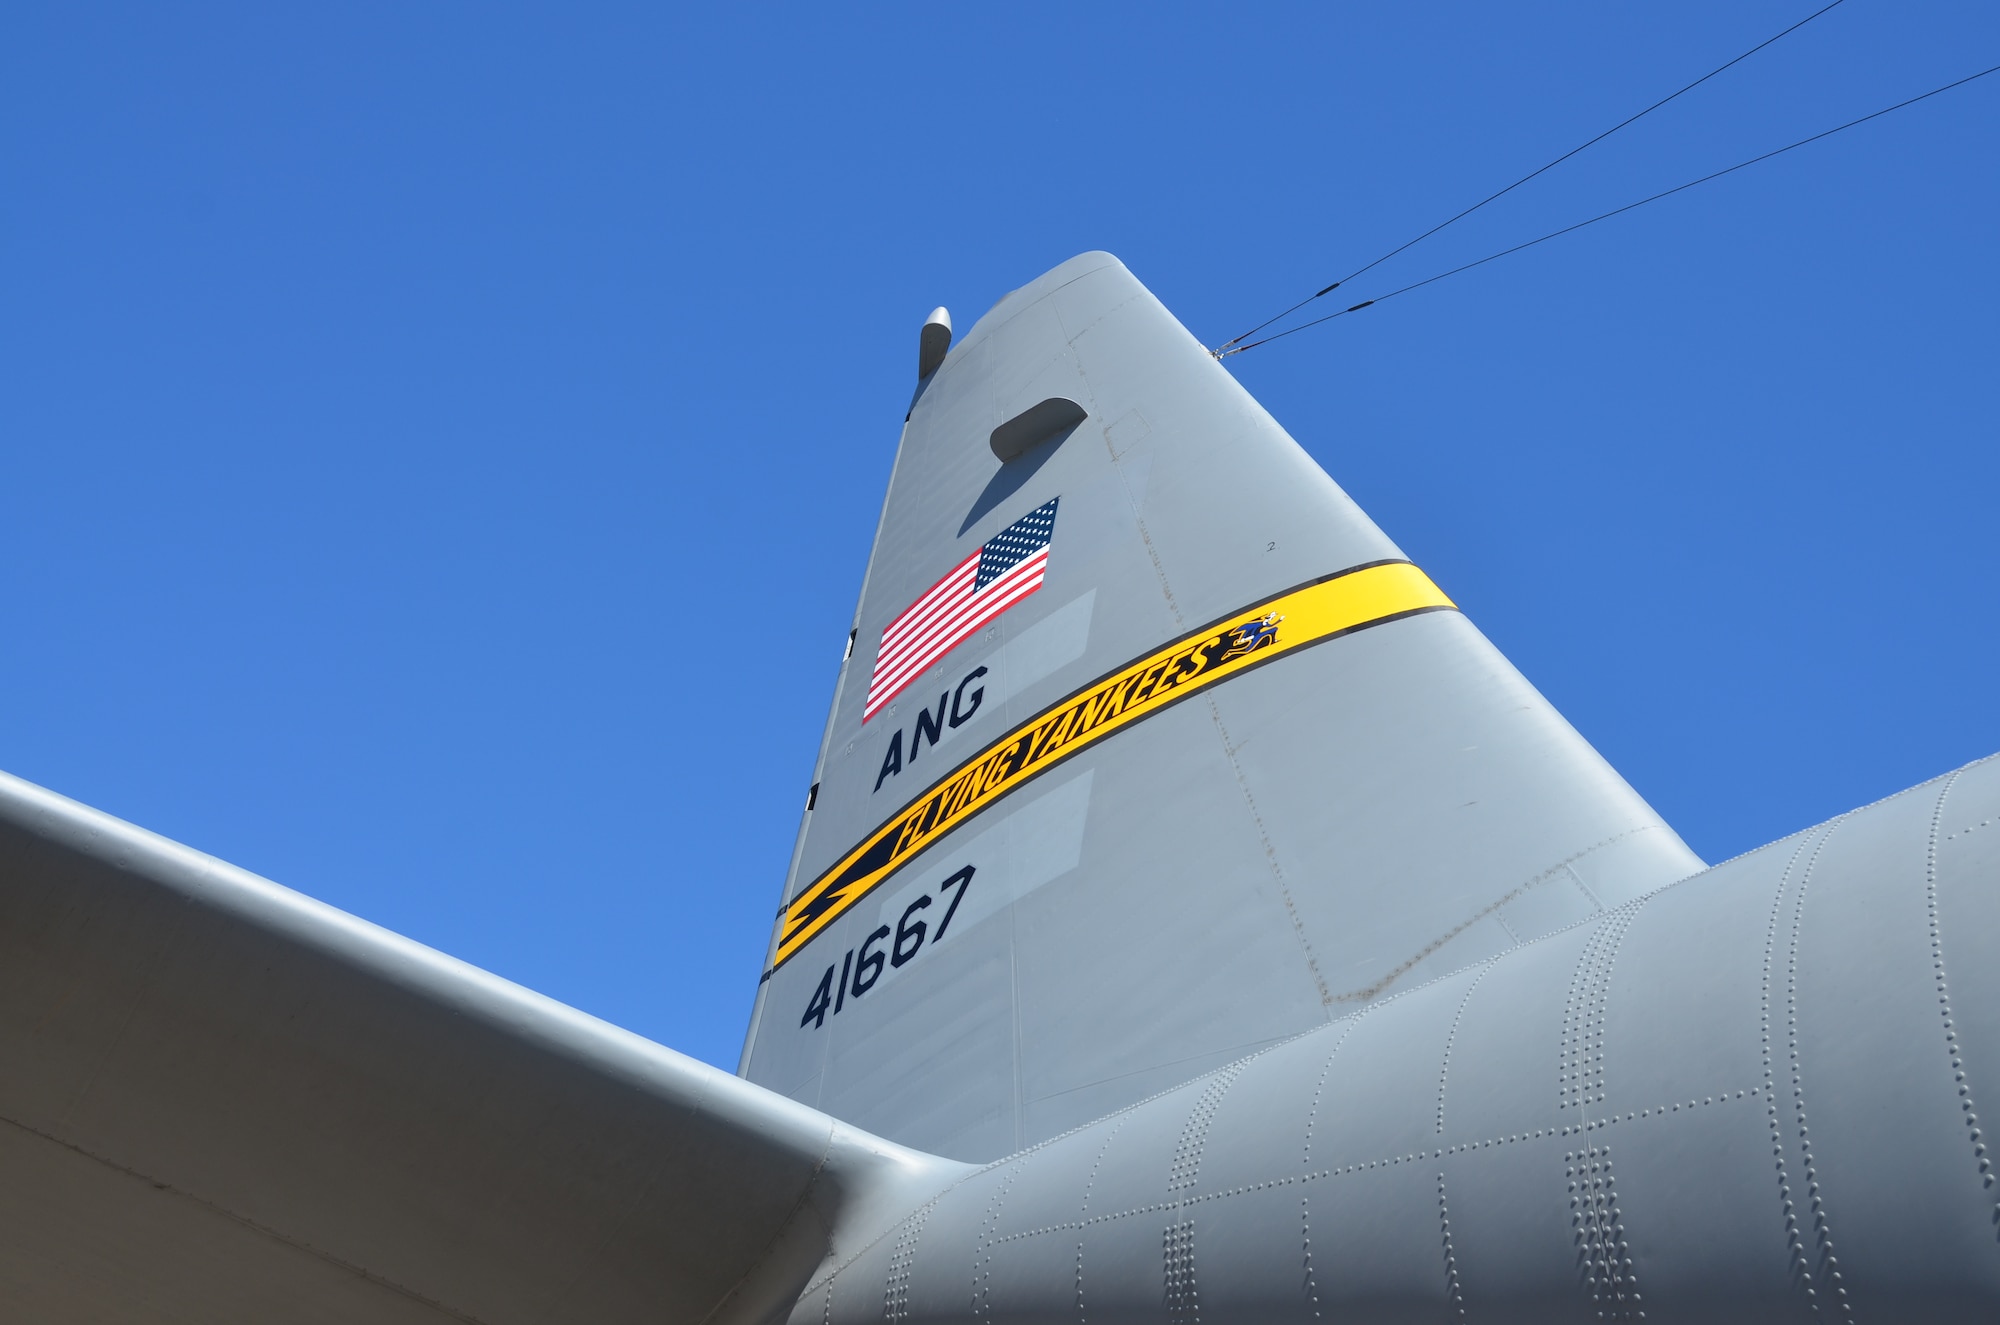 A first look at the new "Flying Yankee" tail flash emblazoned across the vertical stabilizer of the first of eight C-130H aircraft expected to be assigned to the Connecticut Air National Guard moments after it touched down at Bradley International Airport, Windsor Locks, Conn., Tuesday, Sept. 24, 2013. (U.S. Air National Guard photo by Maj. Jefferson Heiland)